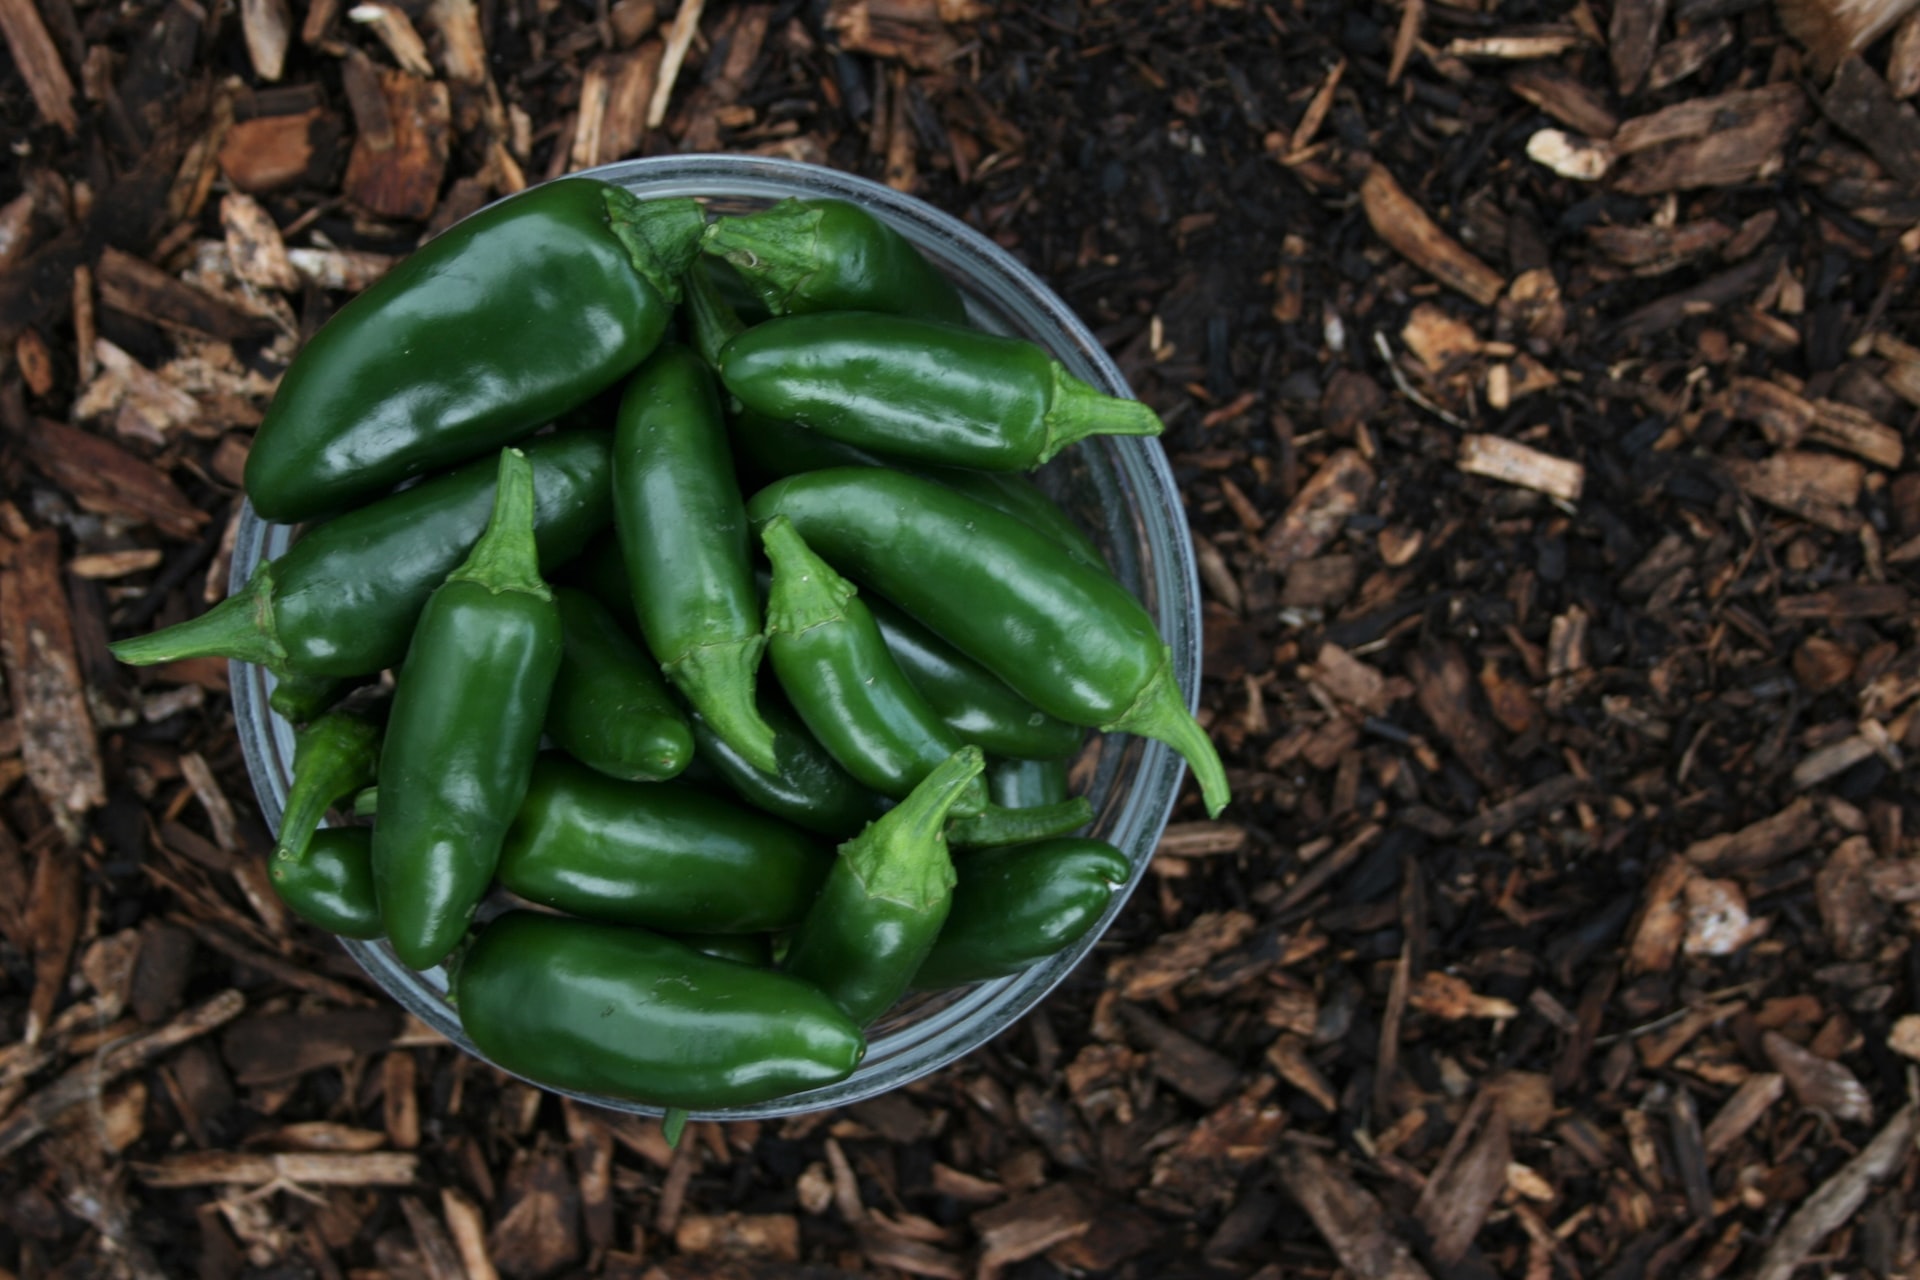 The Origins of Jalapenos: Discover the fascinating history and origins of the jalapeno pepper.